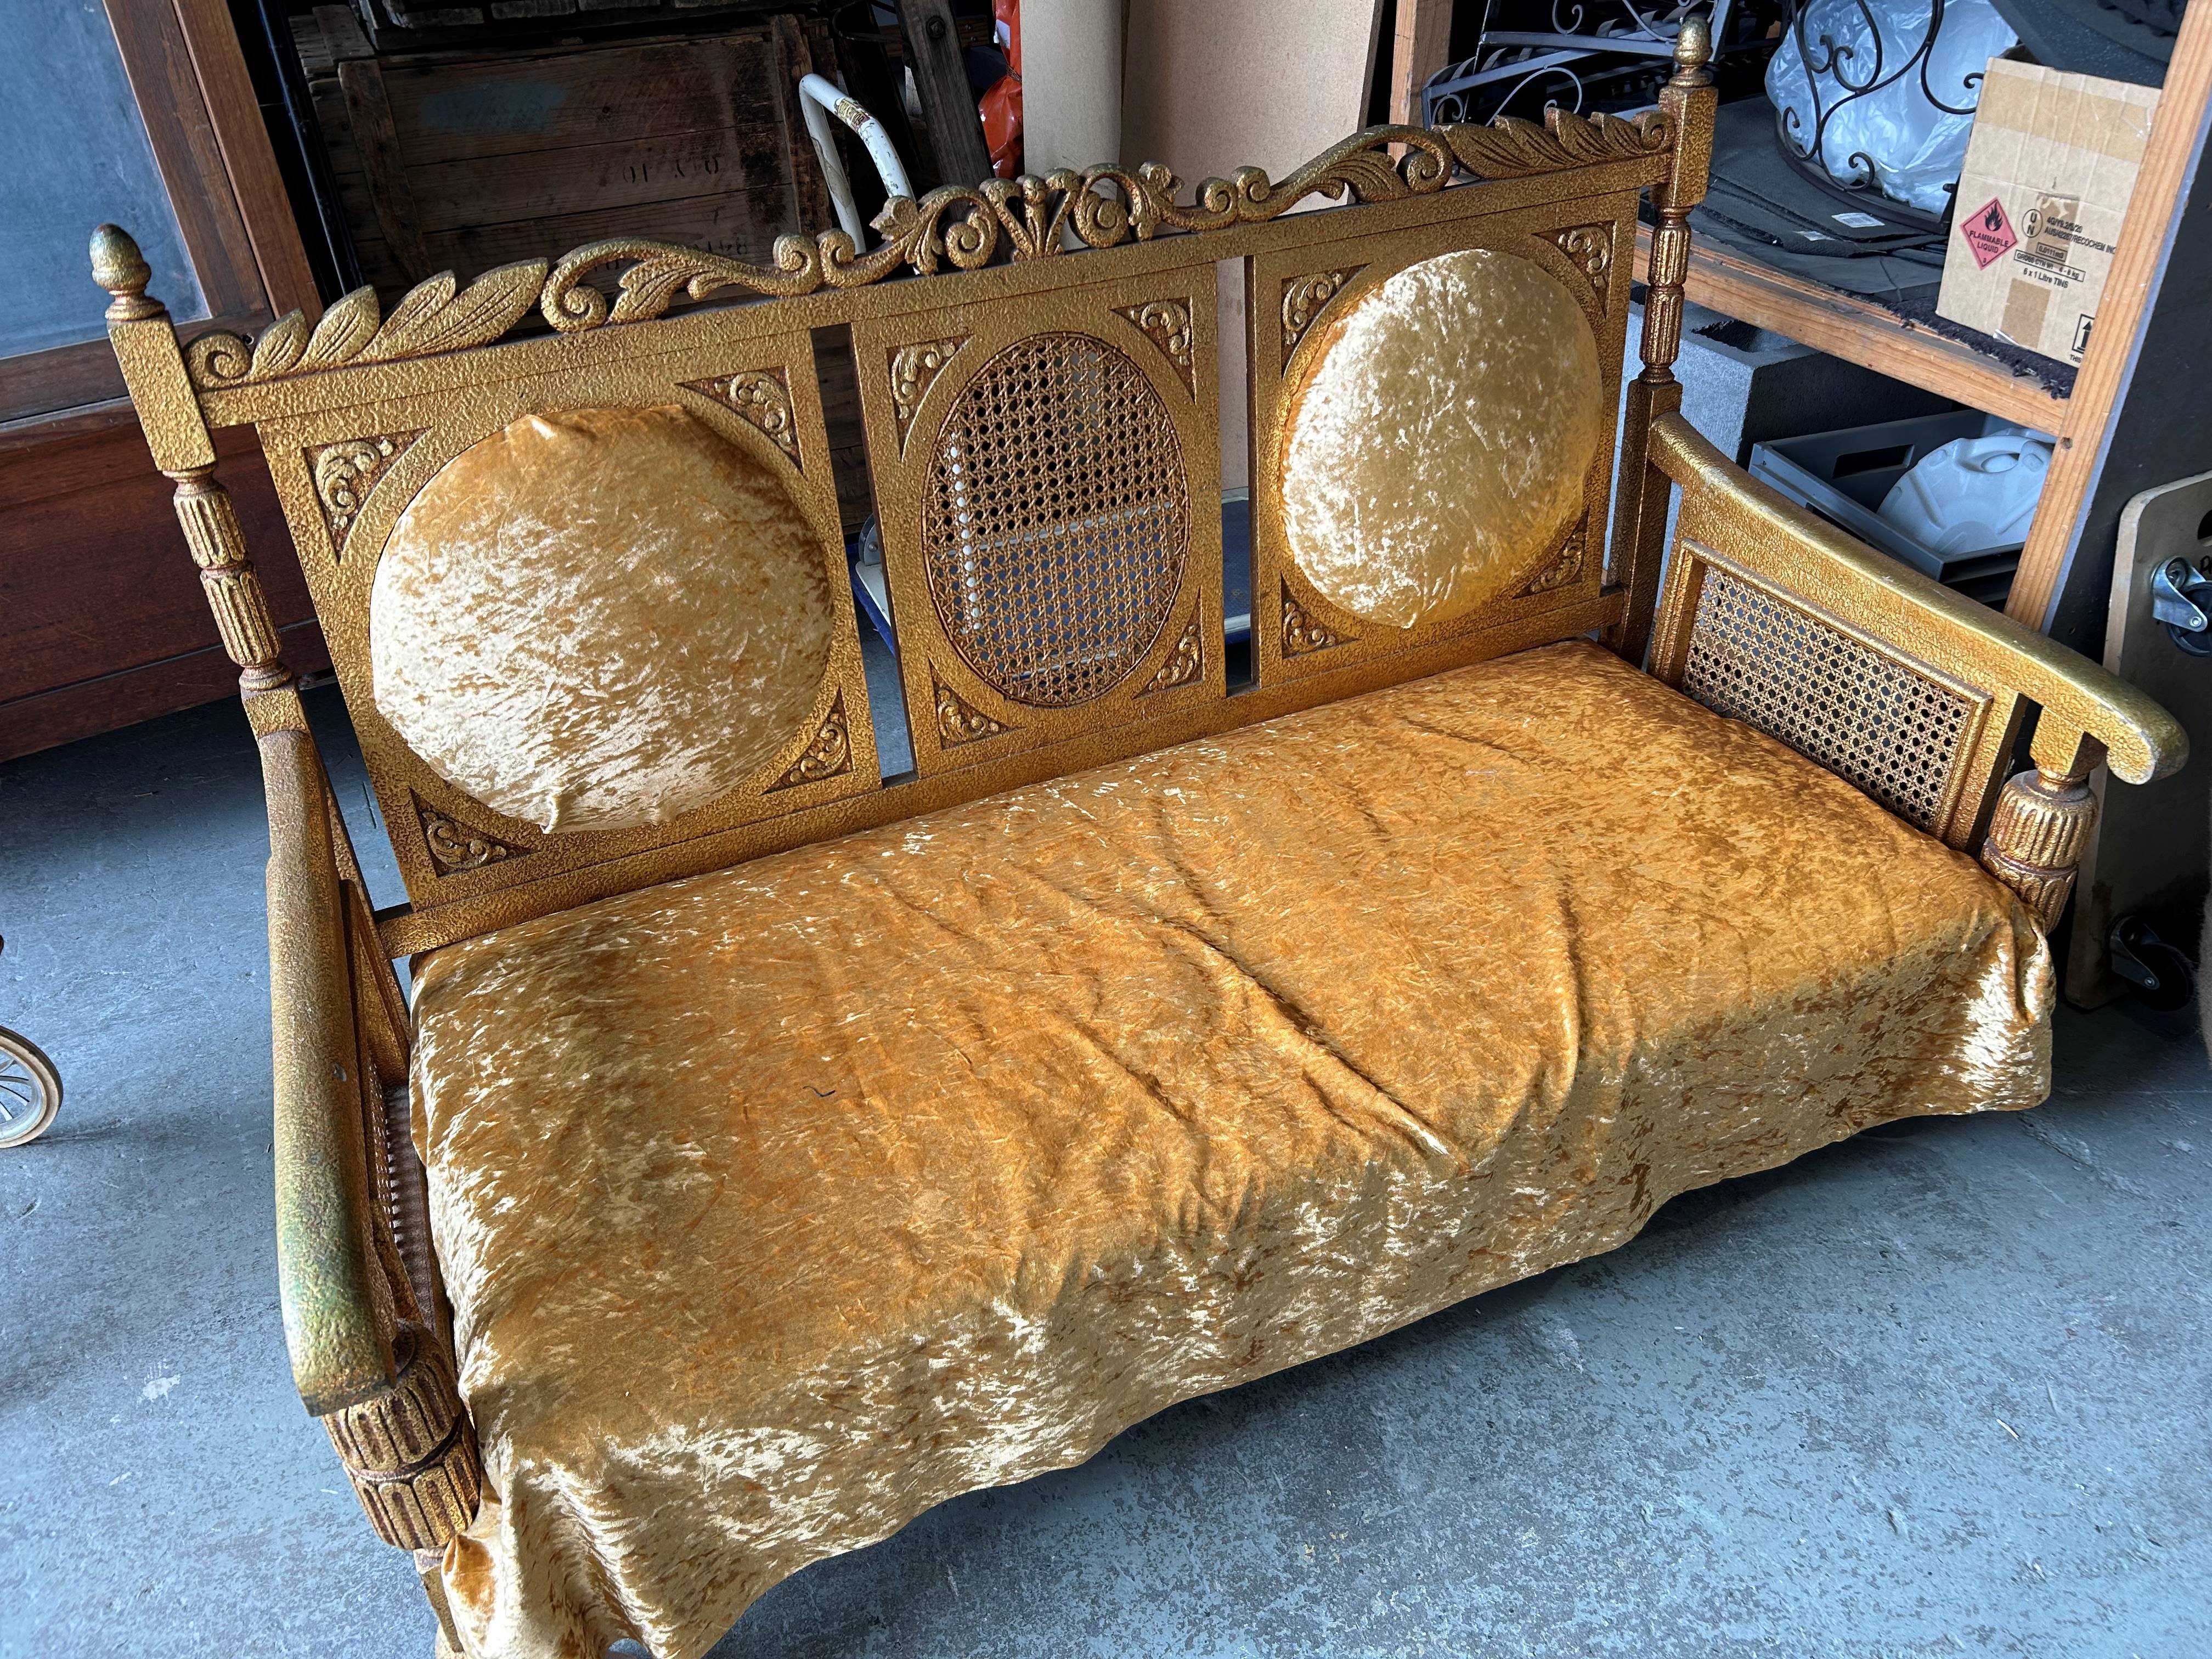 CHAIR, Salon Lounge - 1920s 3 Seater Gold